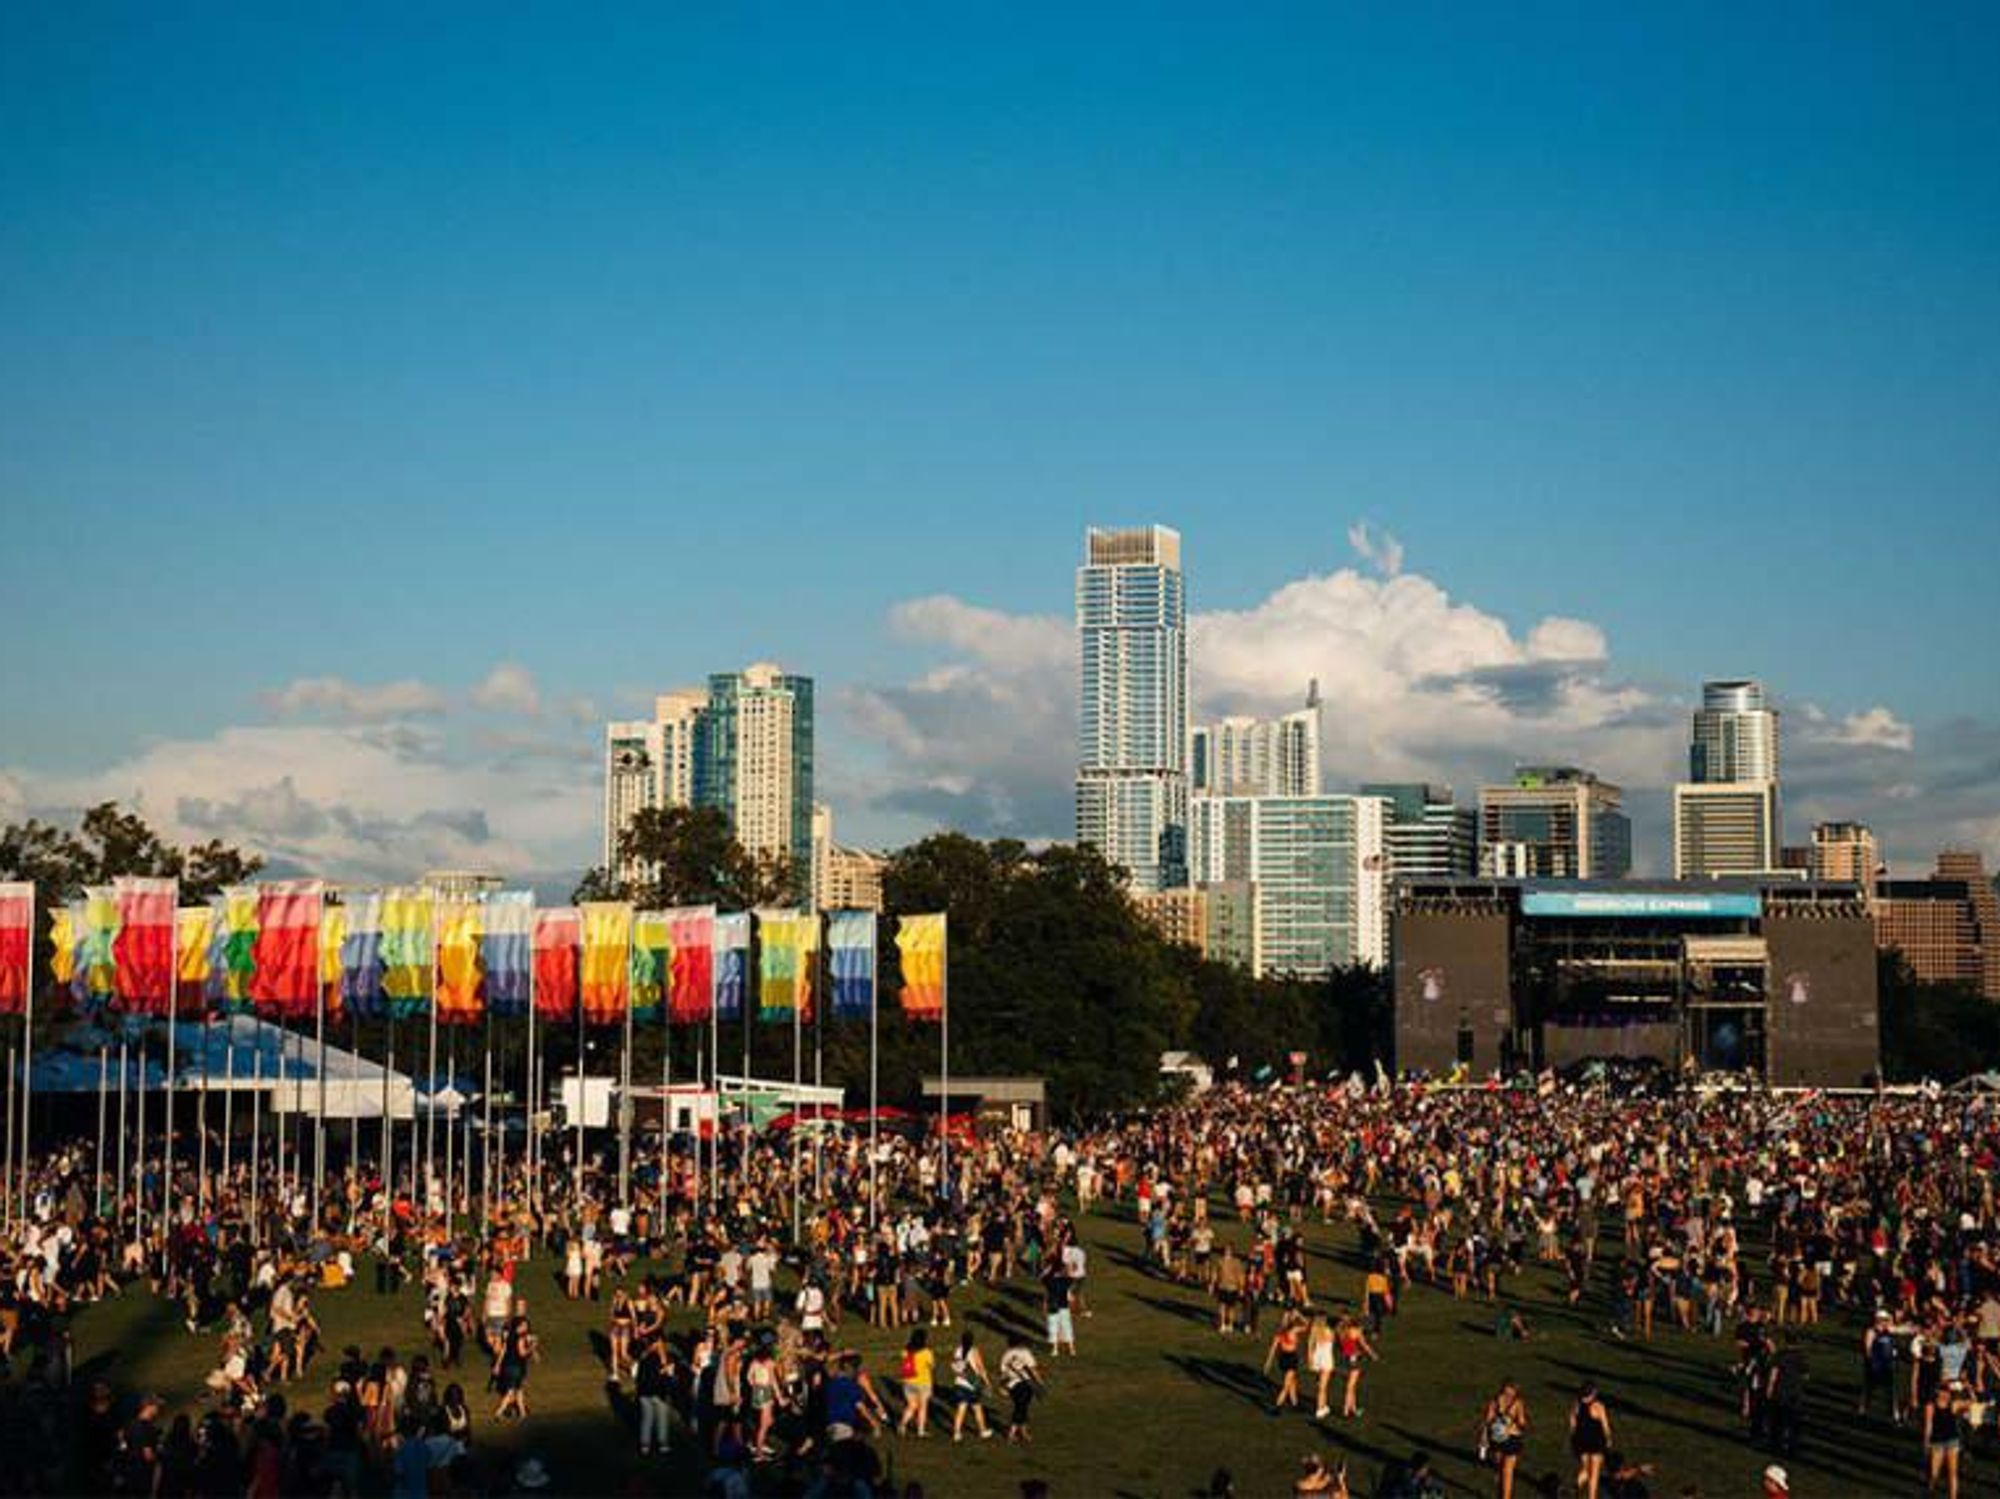 ACL Music Festival, group of people on concert grounds